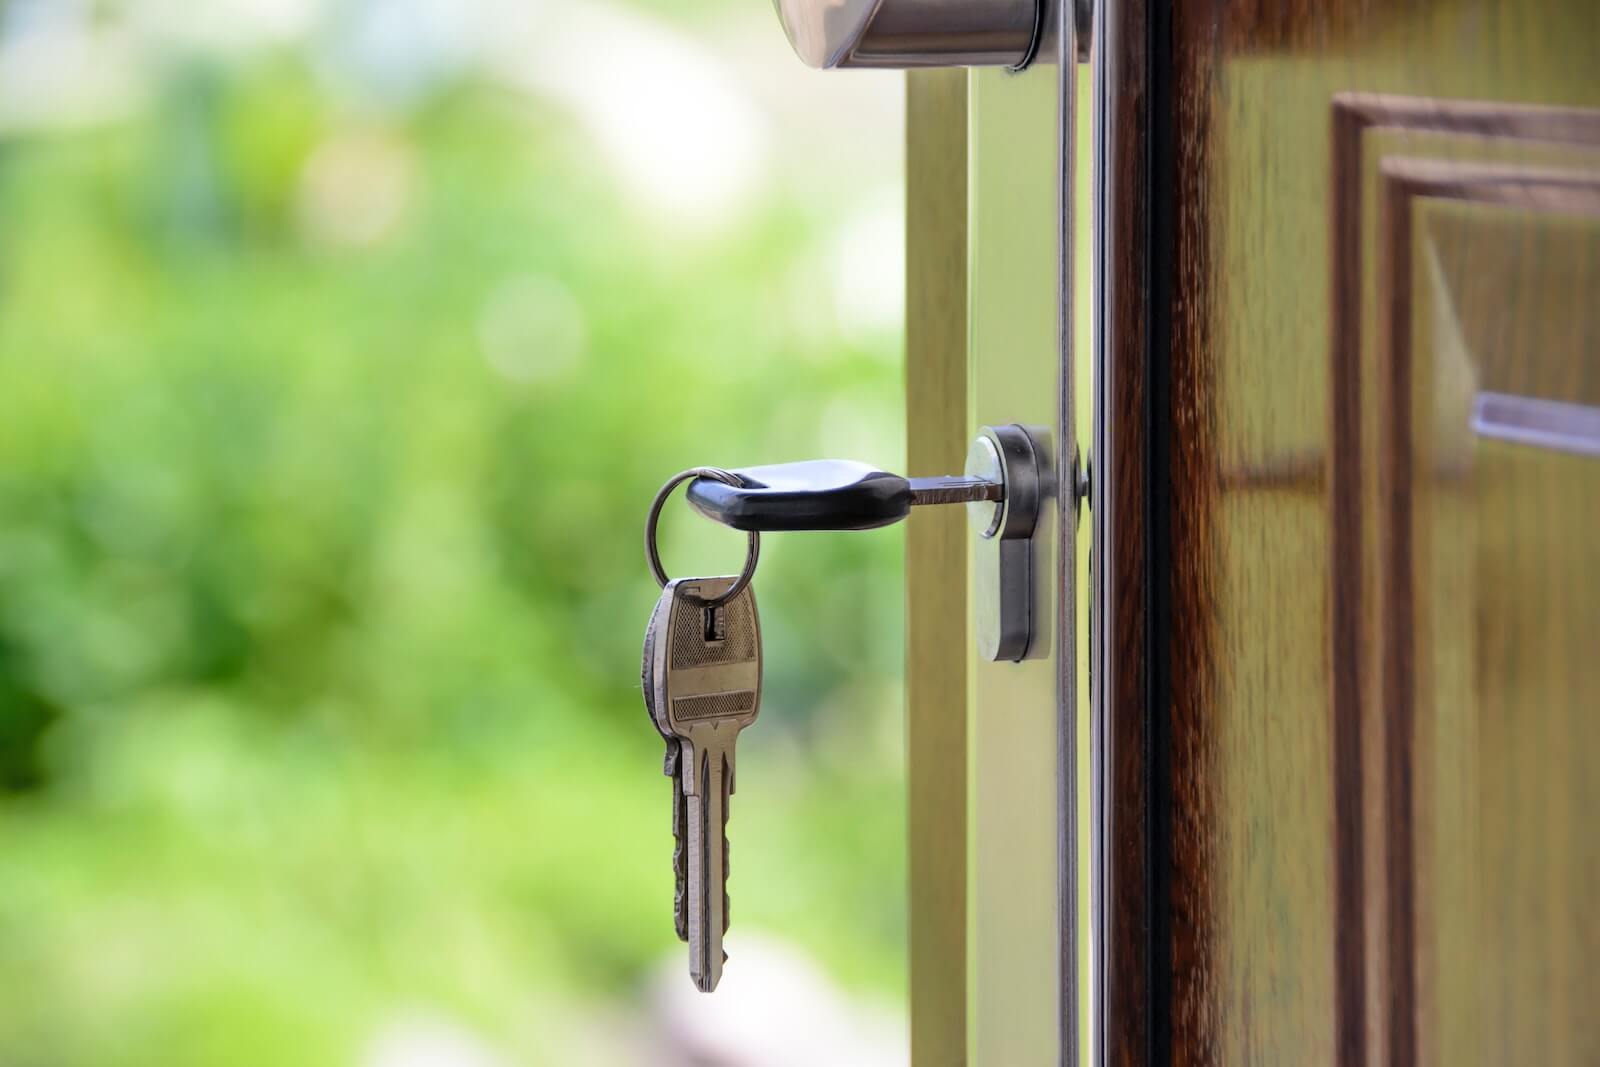 A close-up image of a key in the lock of a home's front door. There are two other keys on the key chain, and greenery is out of focus in the background.